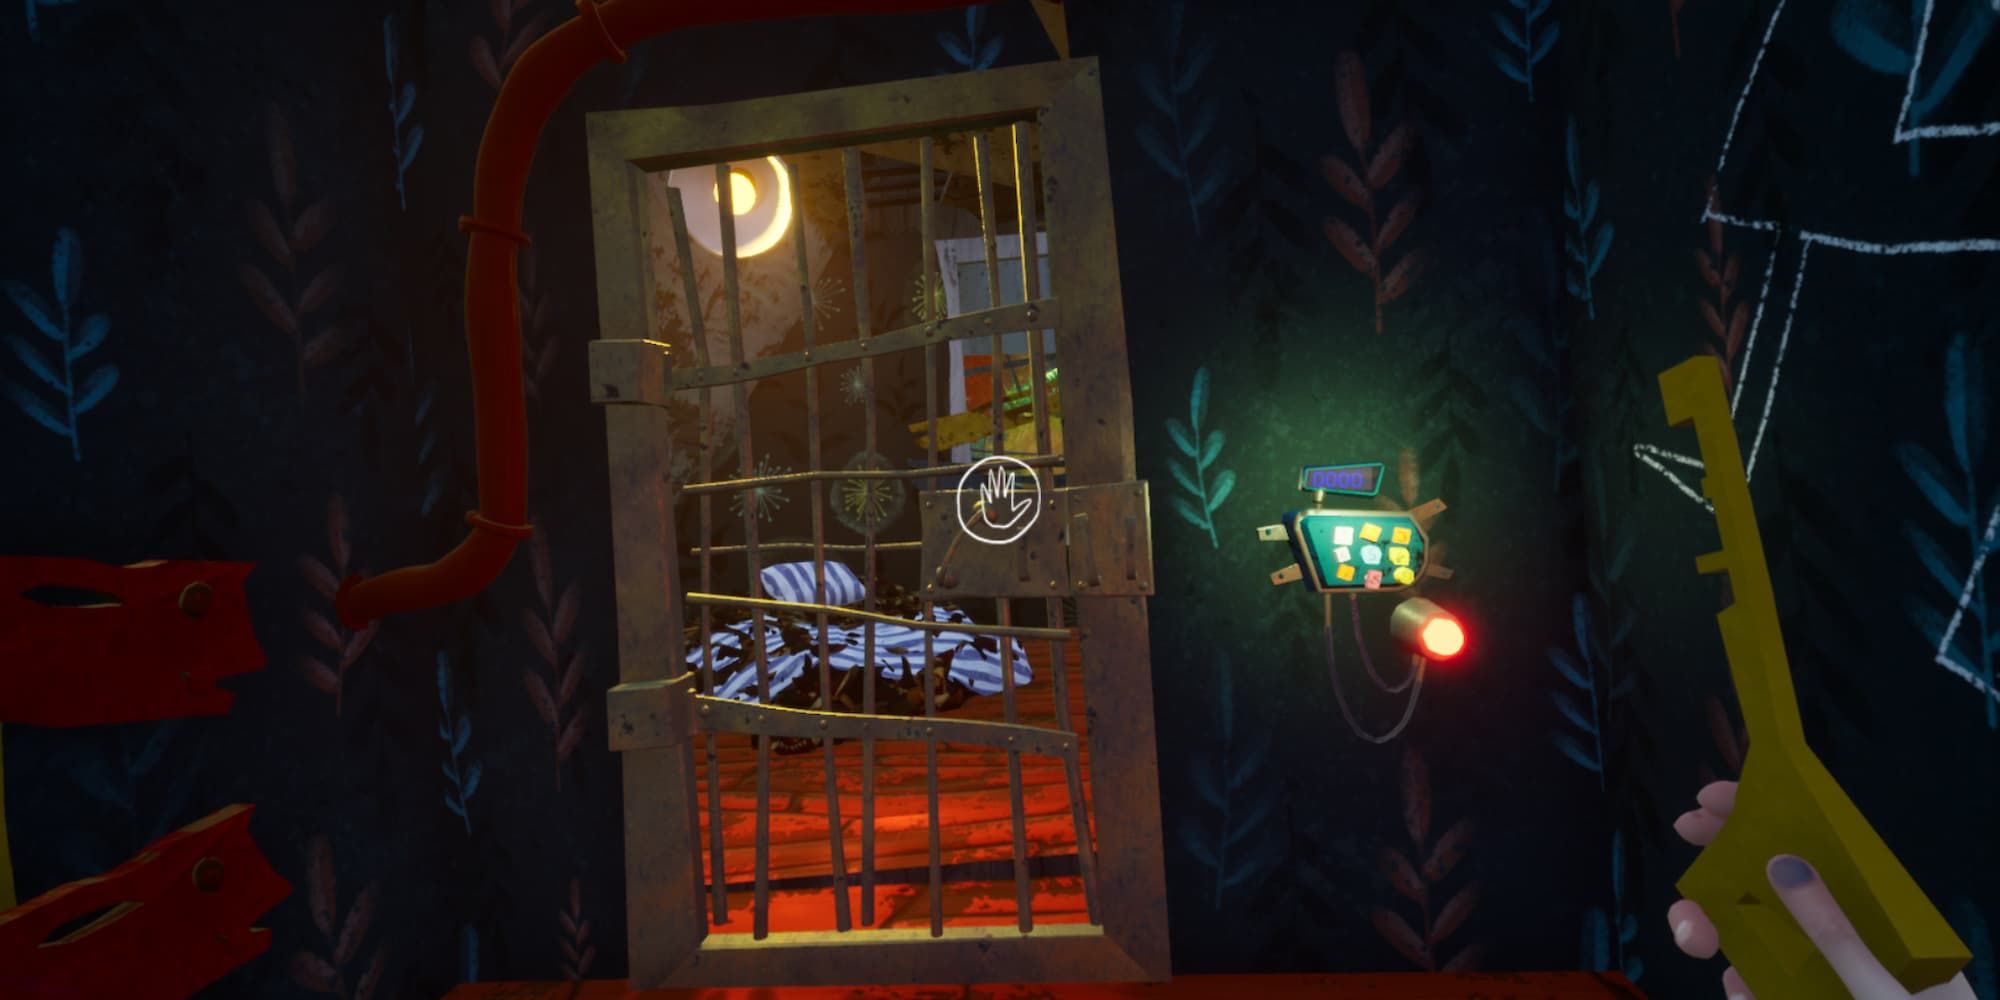 The player approaches a locked gate with a yellow key in Hello Neighbor 2.